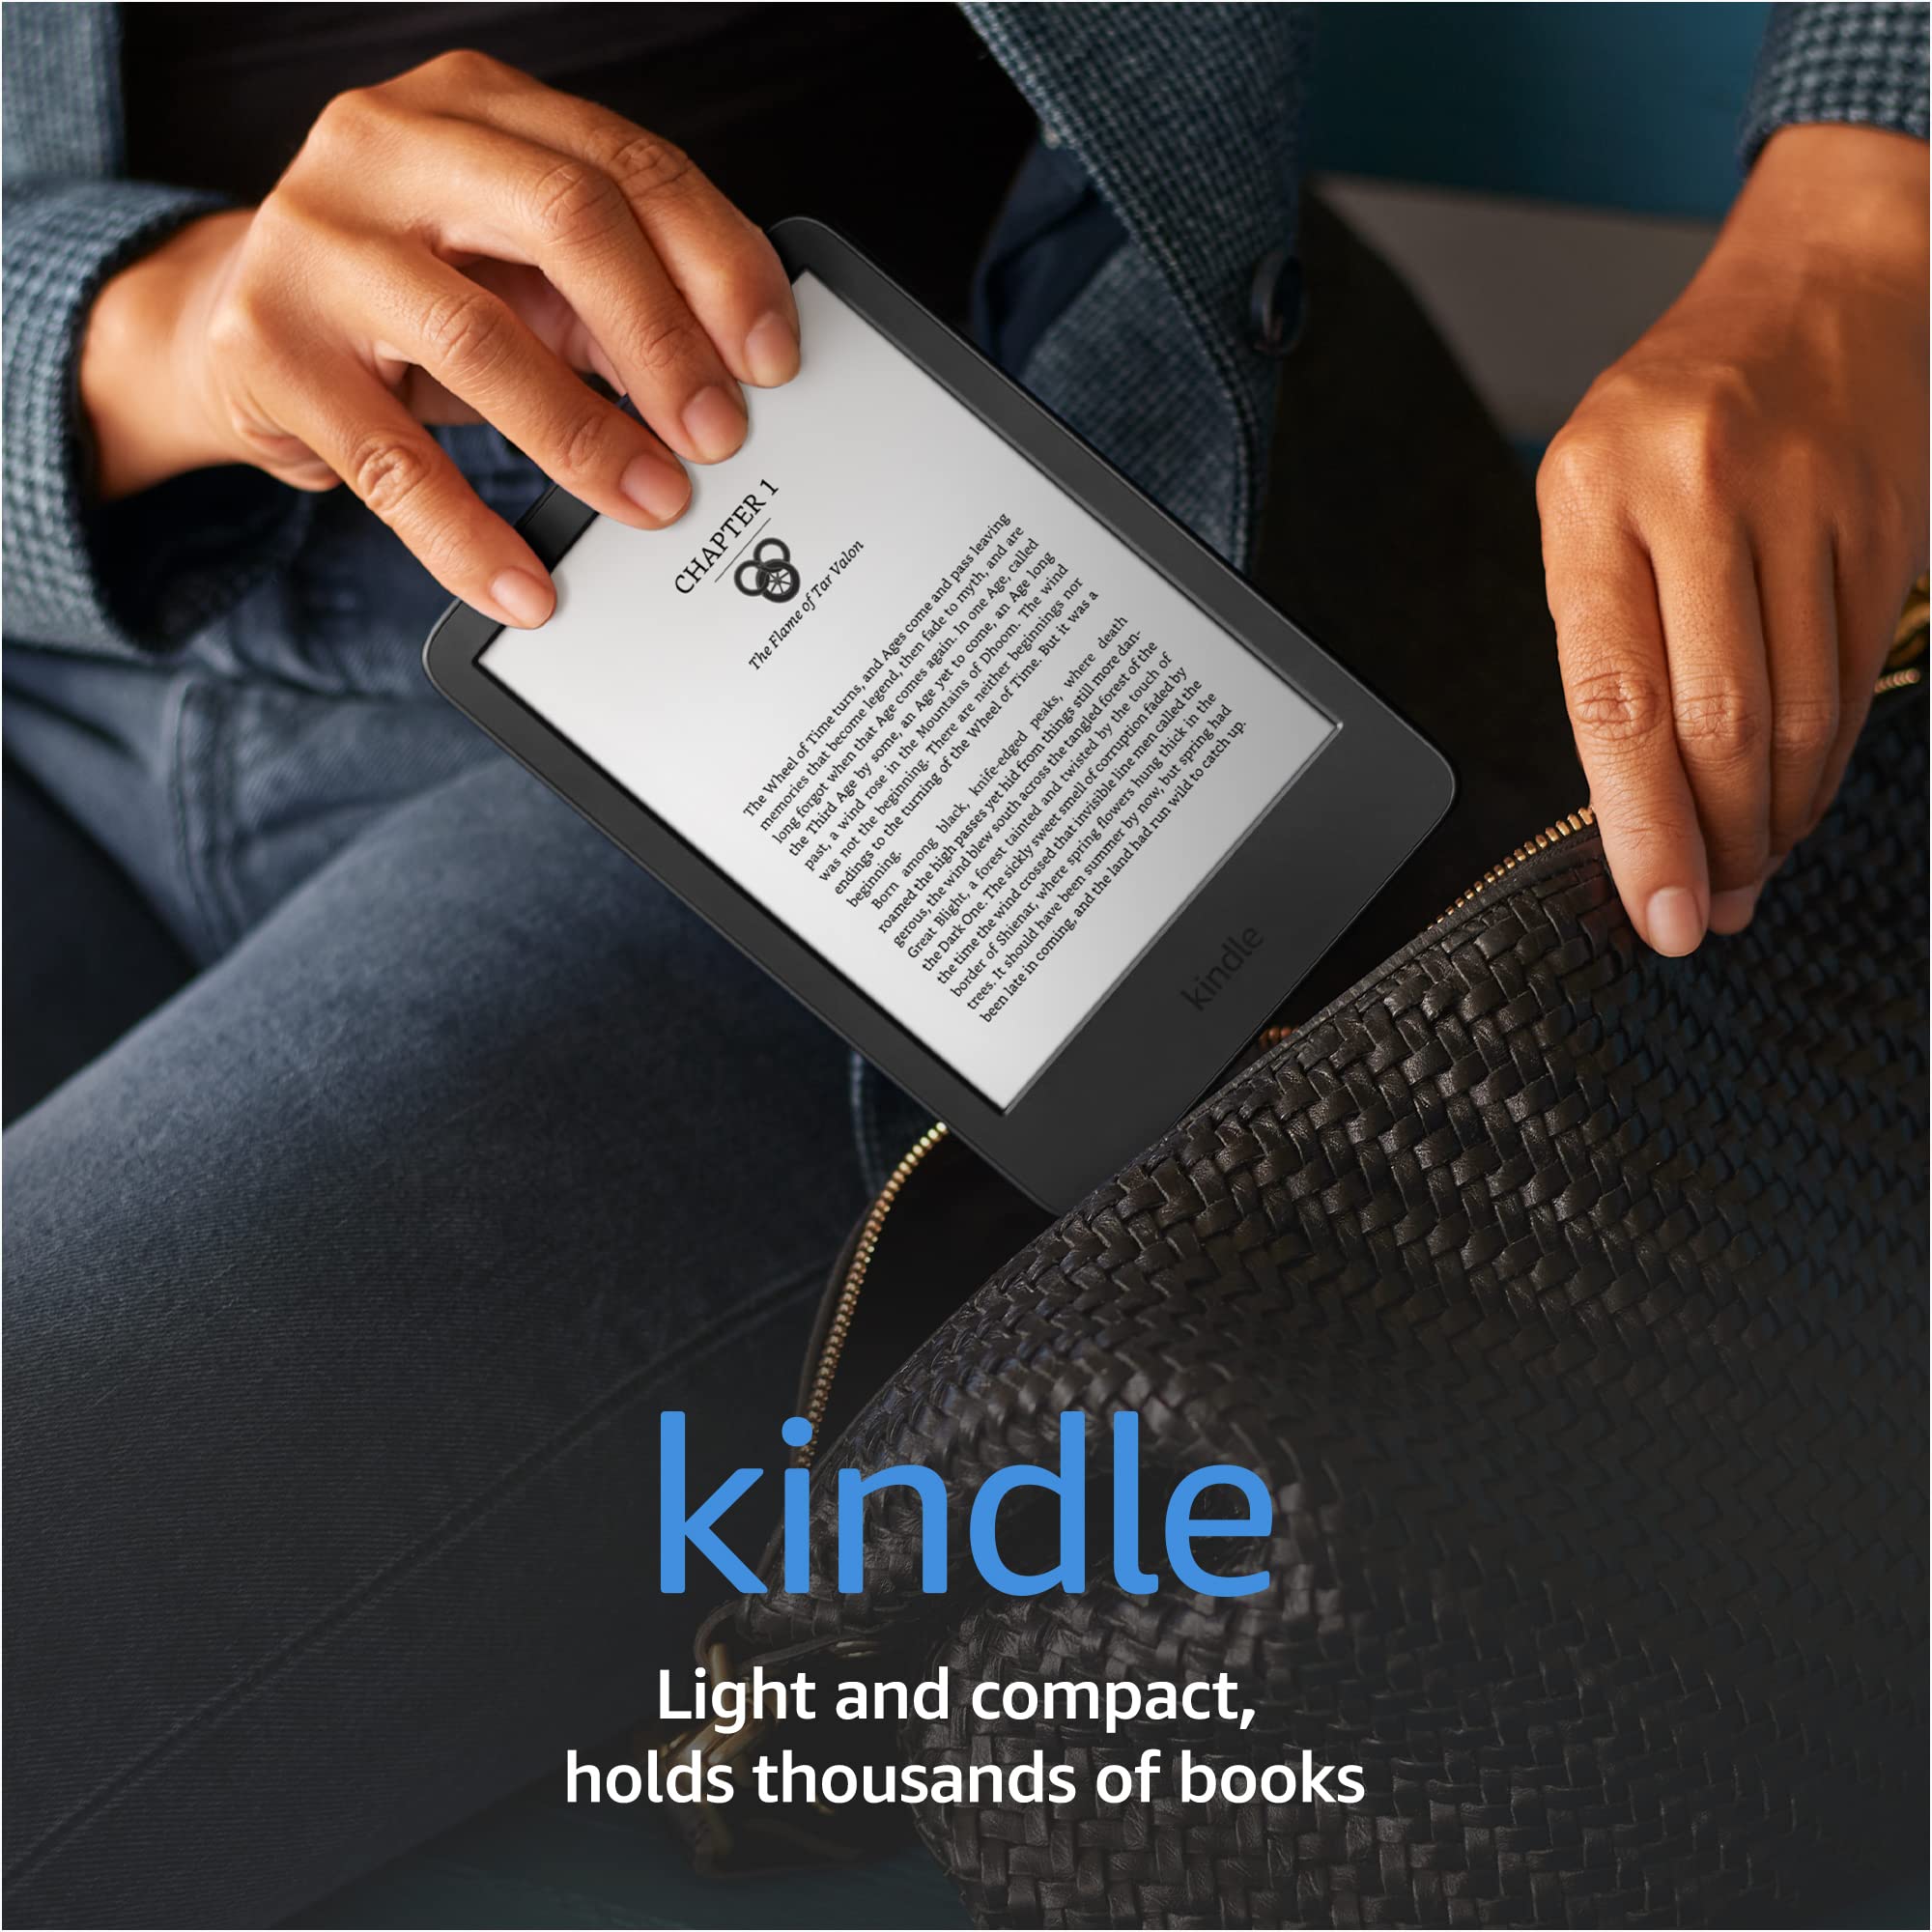 Amazon Kindle (2022 release) – The lightest and most compact Kindle, up to 6 weeks of battery life, glare-free display with adjustable front light, and 16 GB storage – Black